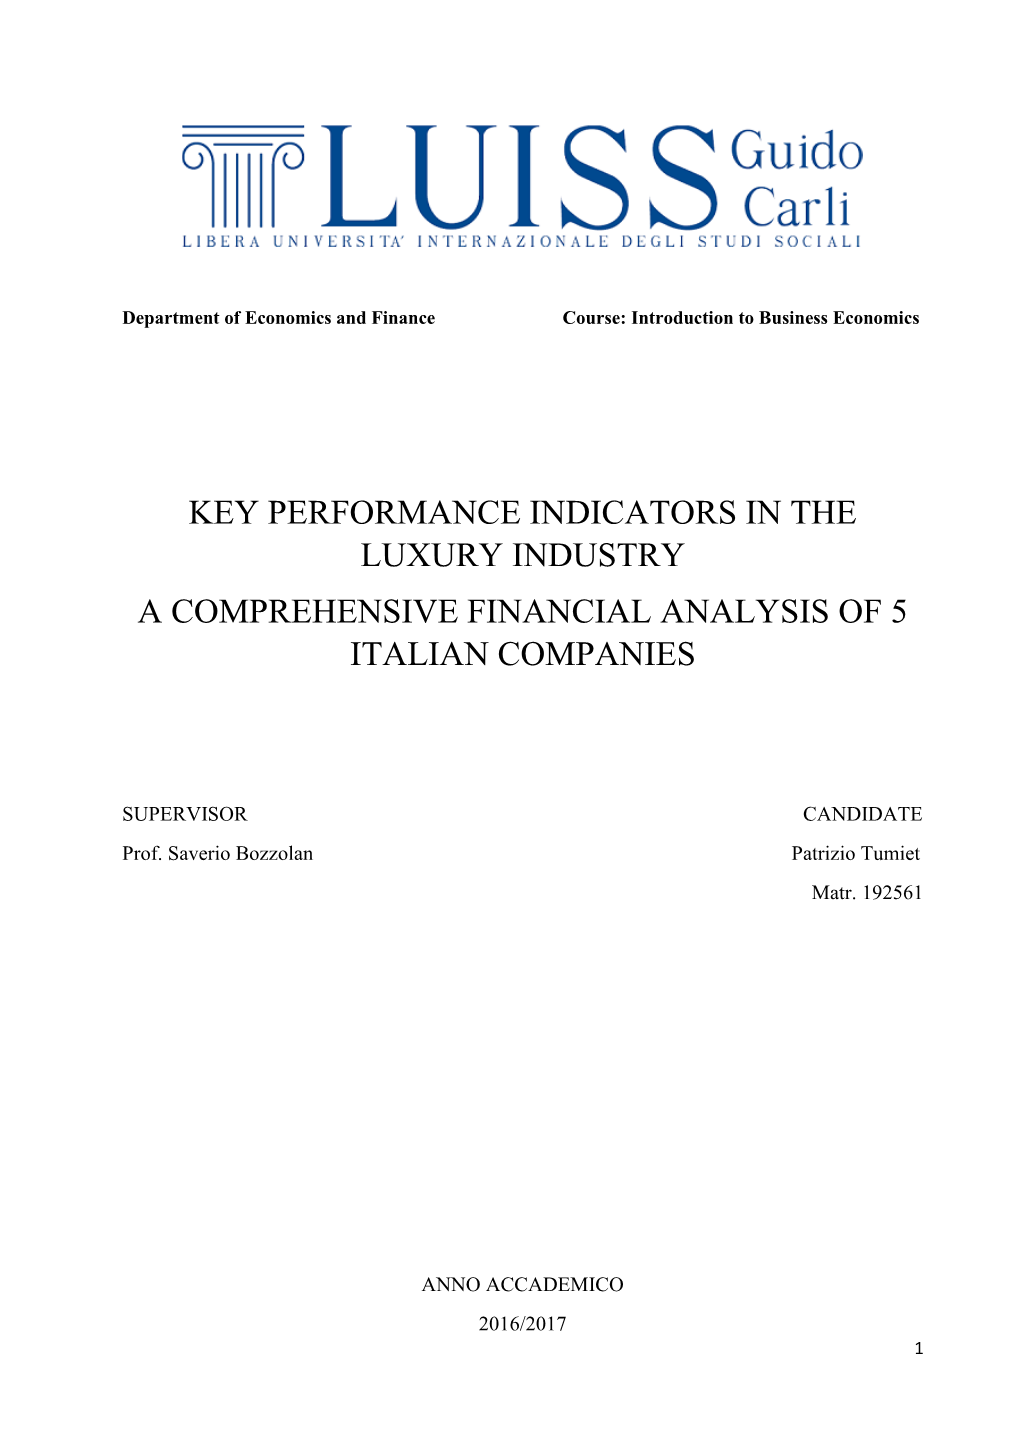 Key Performance Indicators in the Luxury Industry a Comprehensive Financial Analysis of 5 Italian Companies